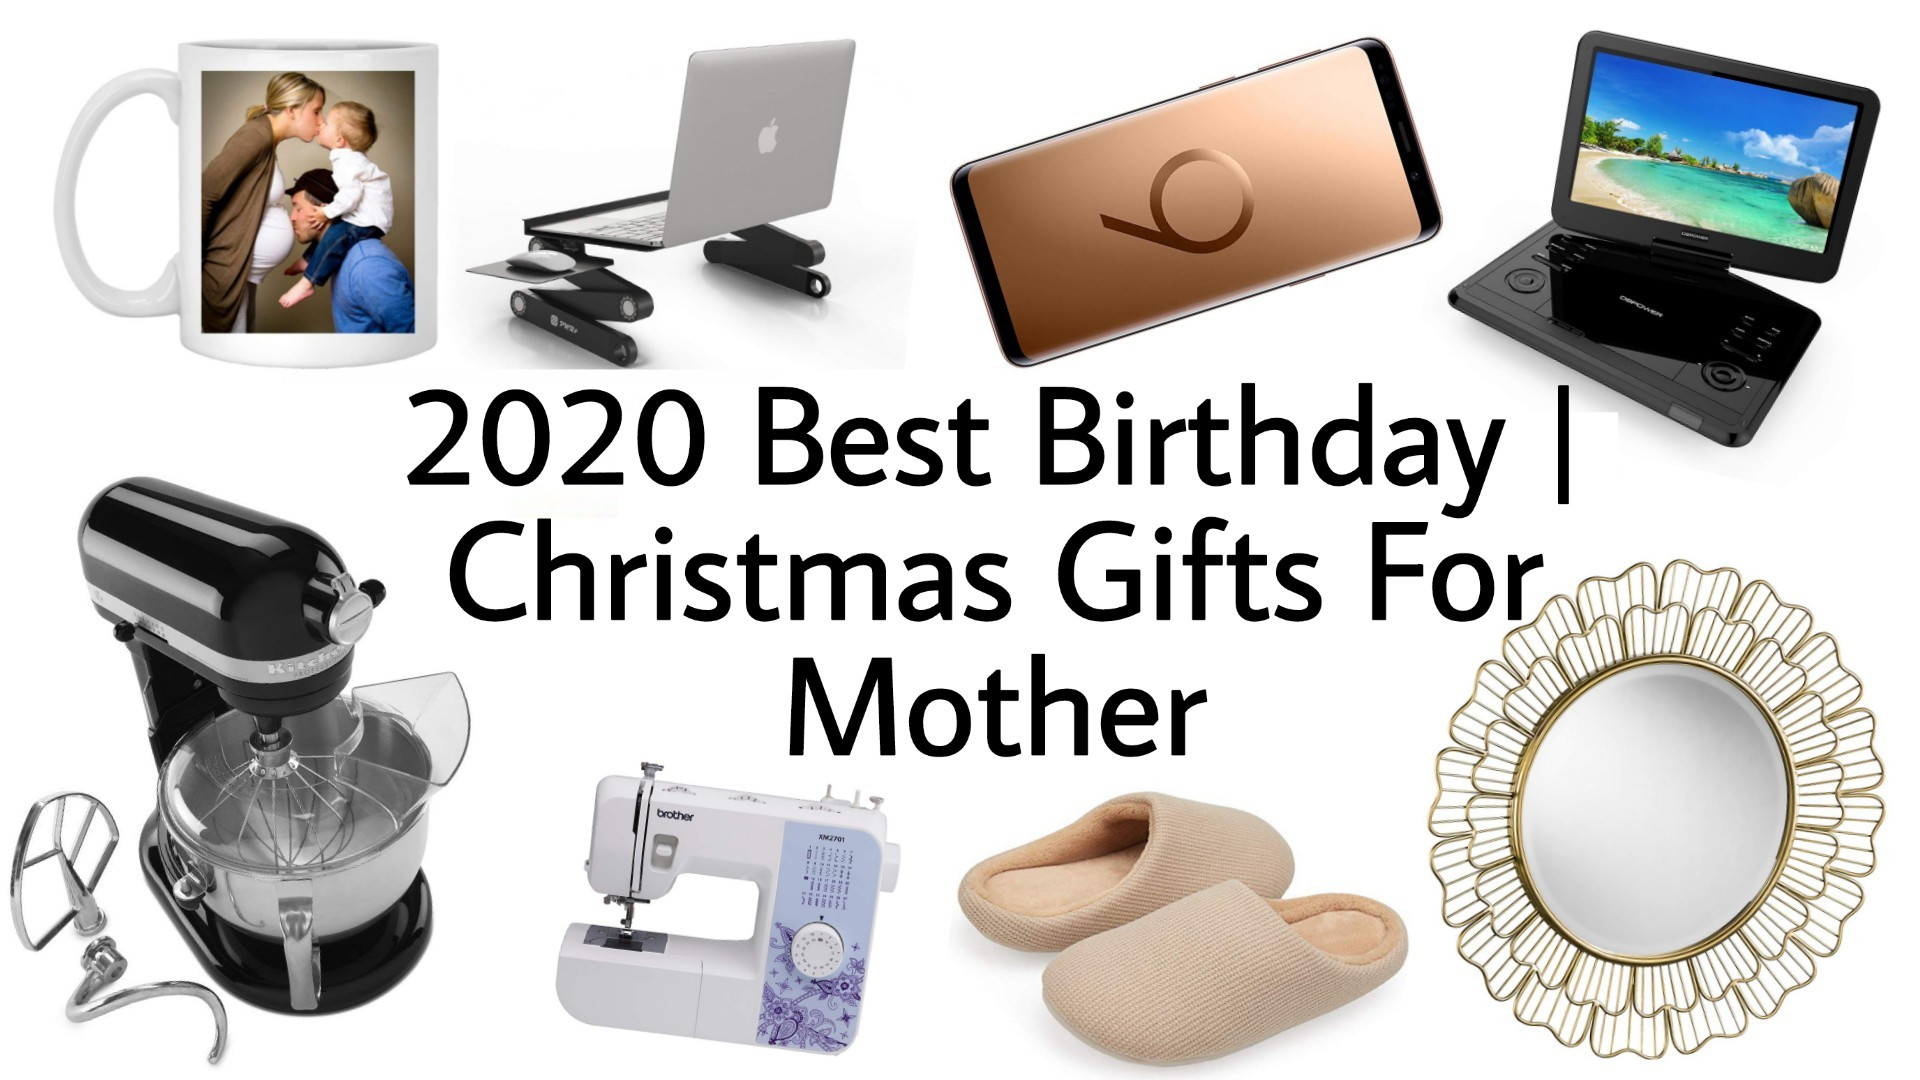 Holiday Gift Ideas 2020
 2020 Best Christmas Gifts for Mom